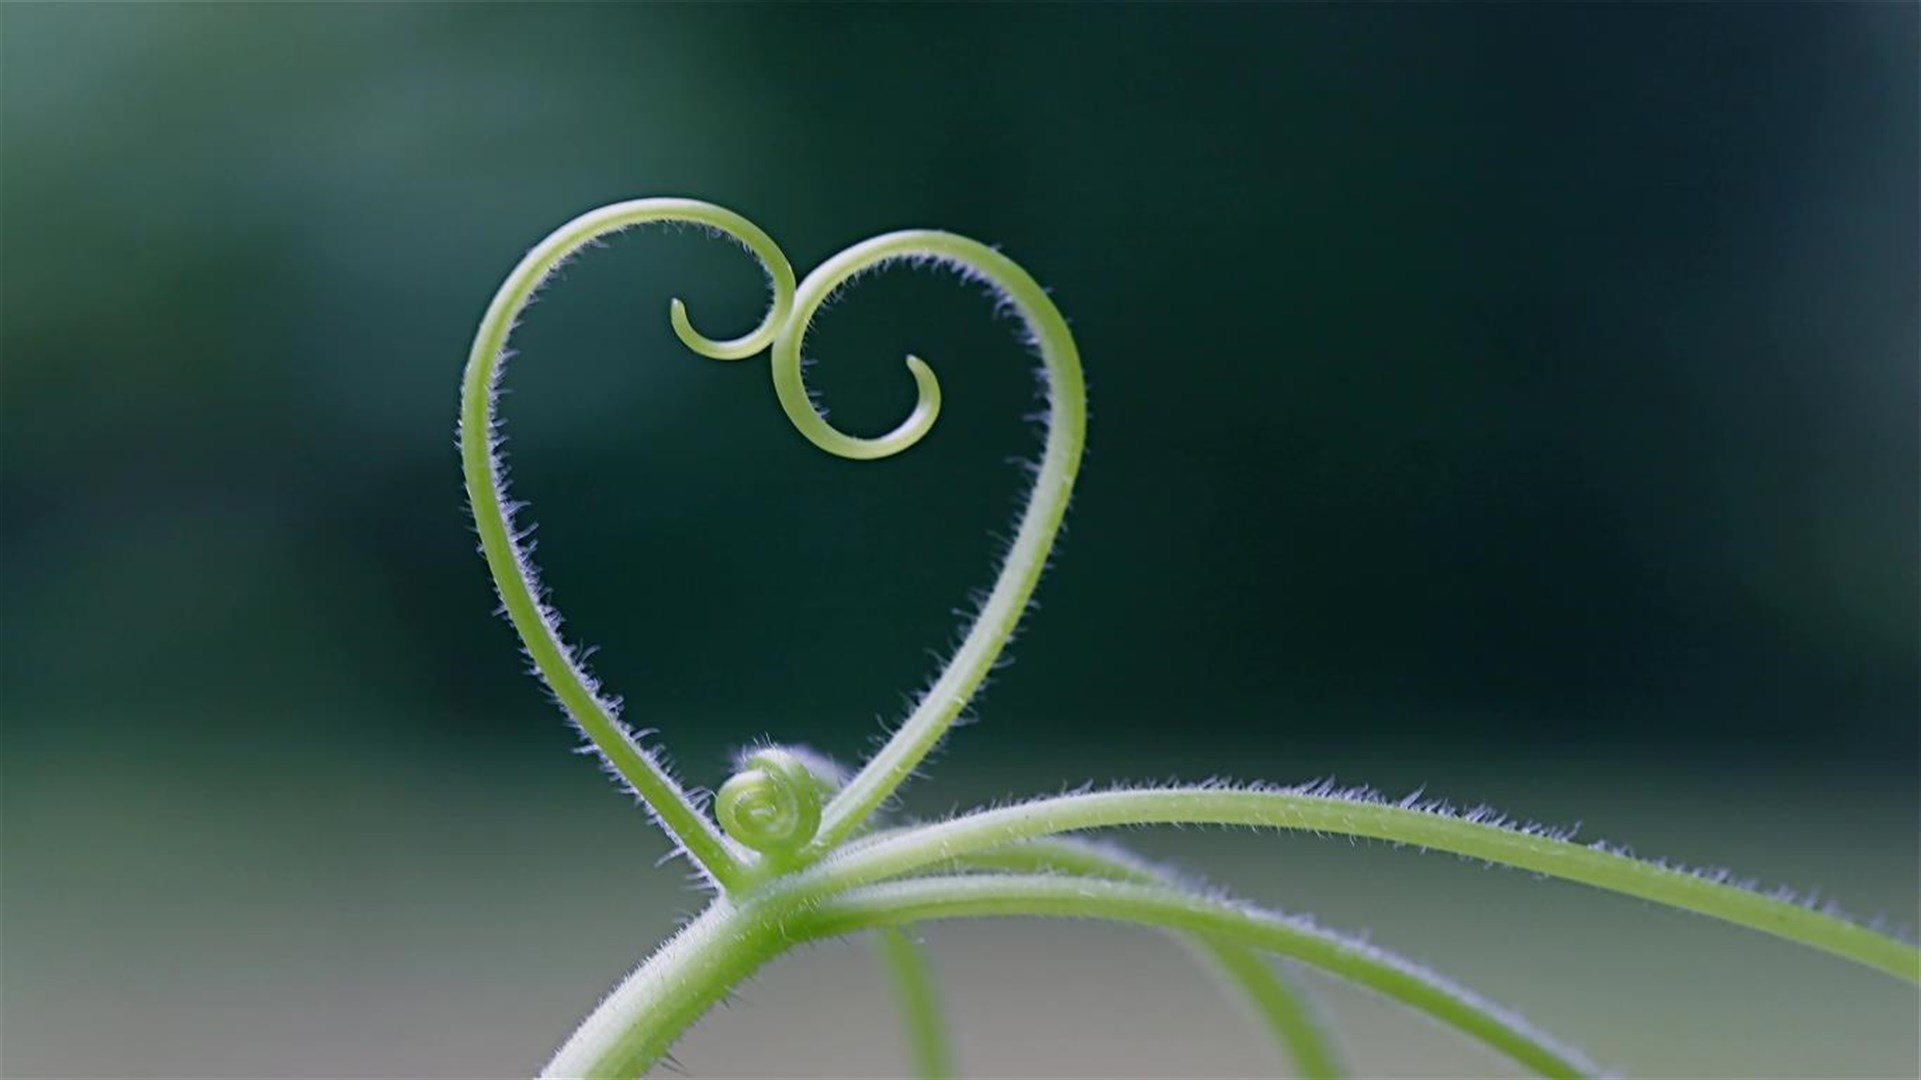 hearts in nature photos